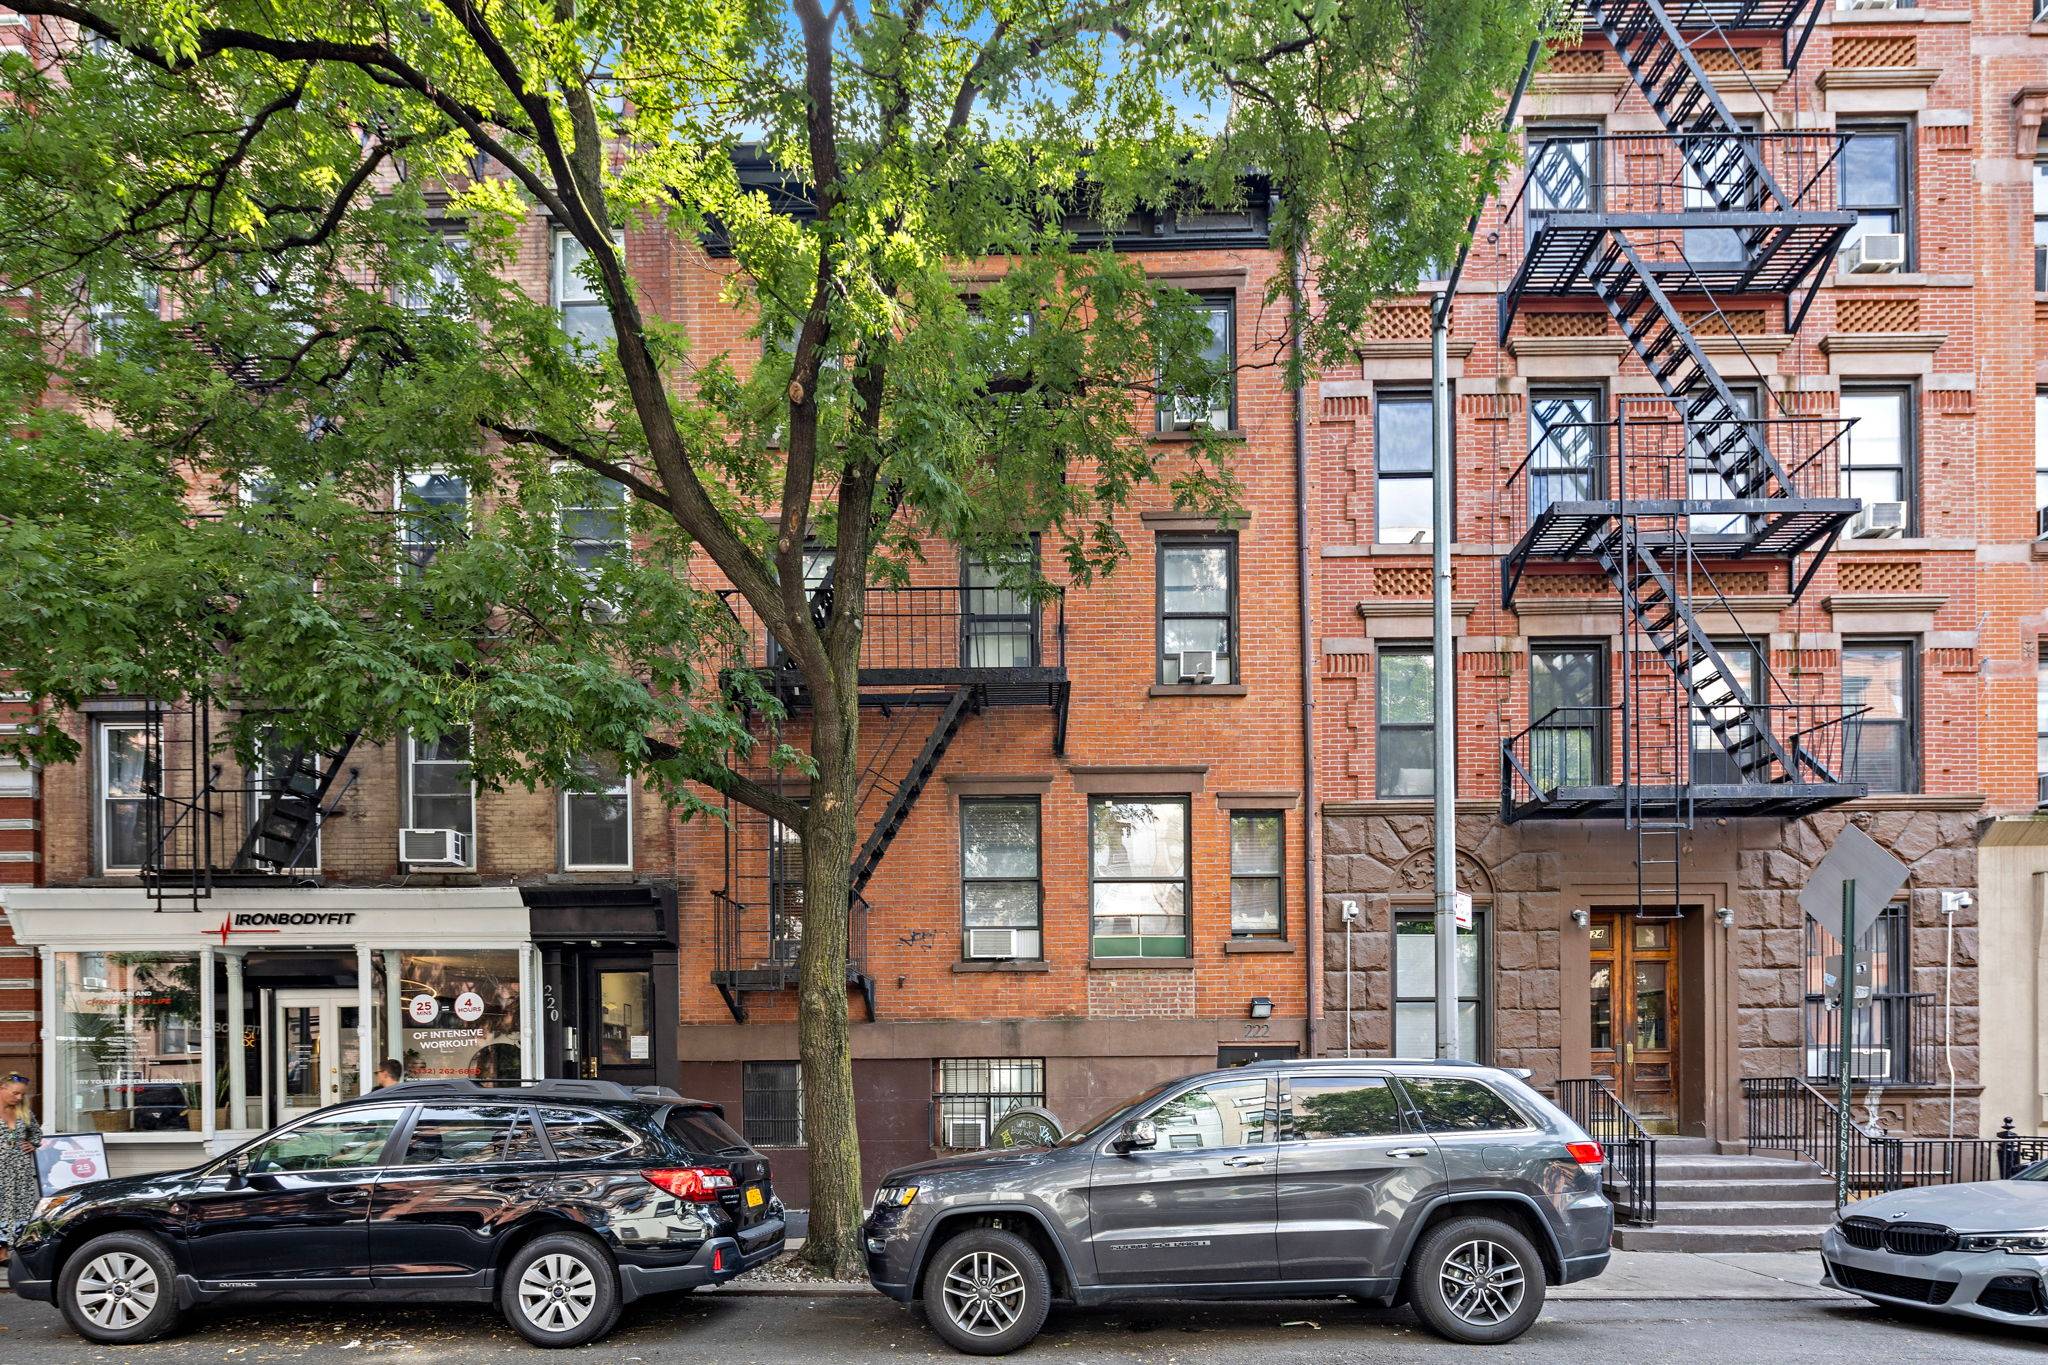 14 UNIT BUILDING FOR SALE IN HEART OF CHELSEA!